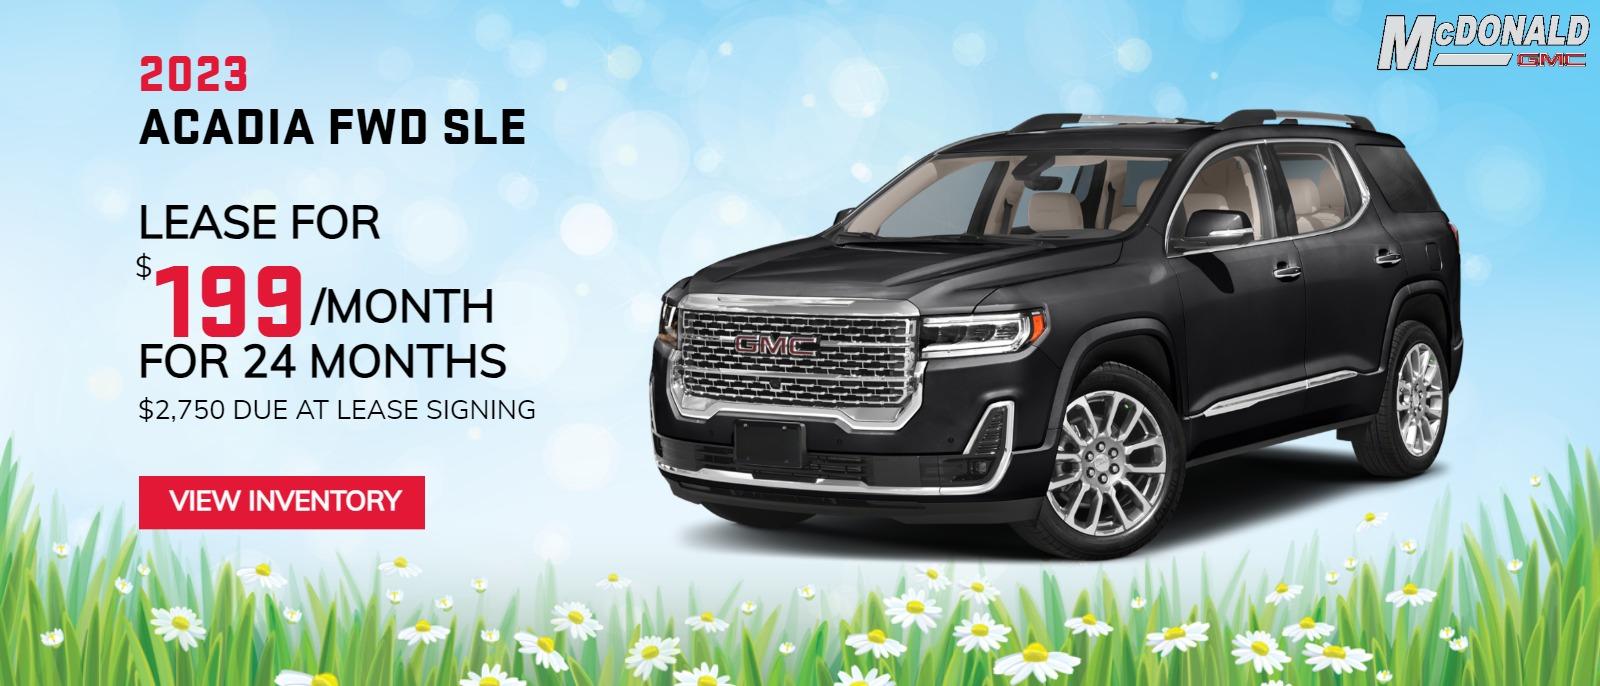 2023 Acadia FWD SLE

Lease for $199/Month
for 24 months
$2750 due at lease signing